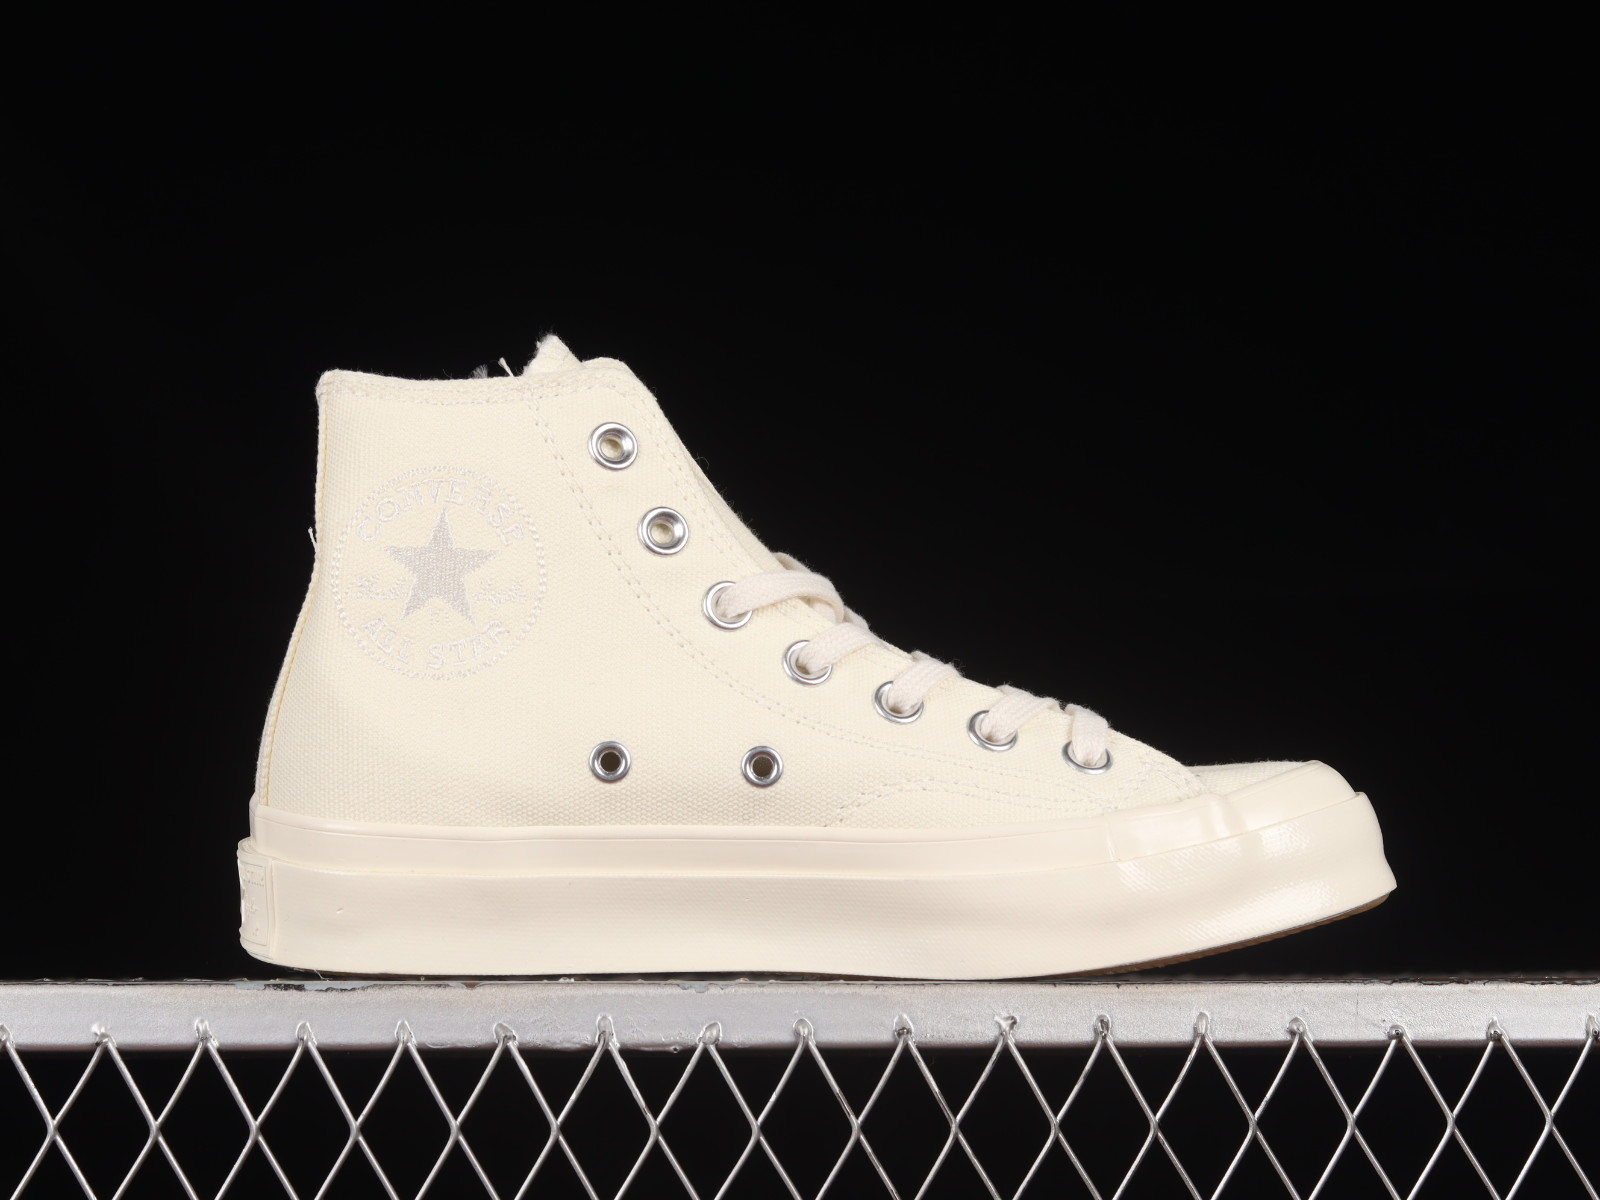 Devin x Converse Chuck 70 The Next Egret A05290C - Converse is launching another -